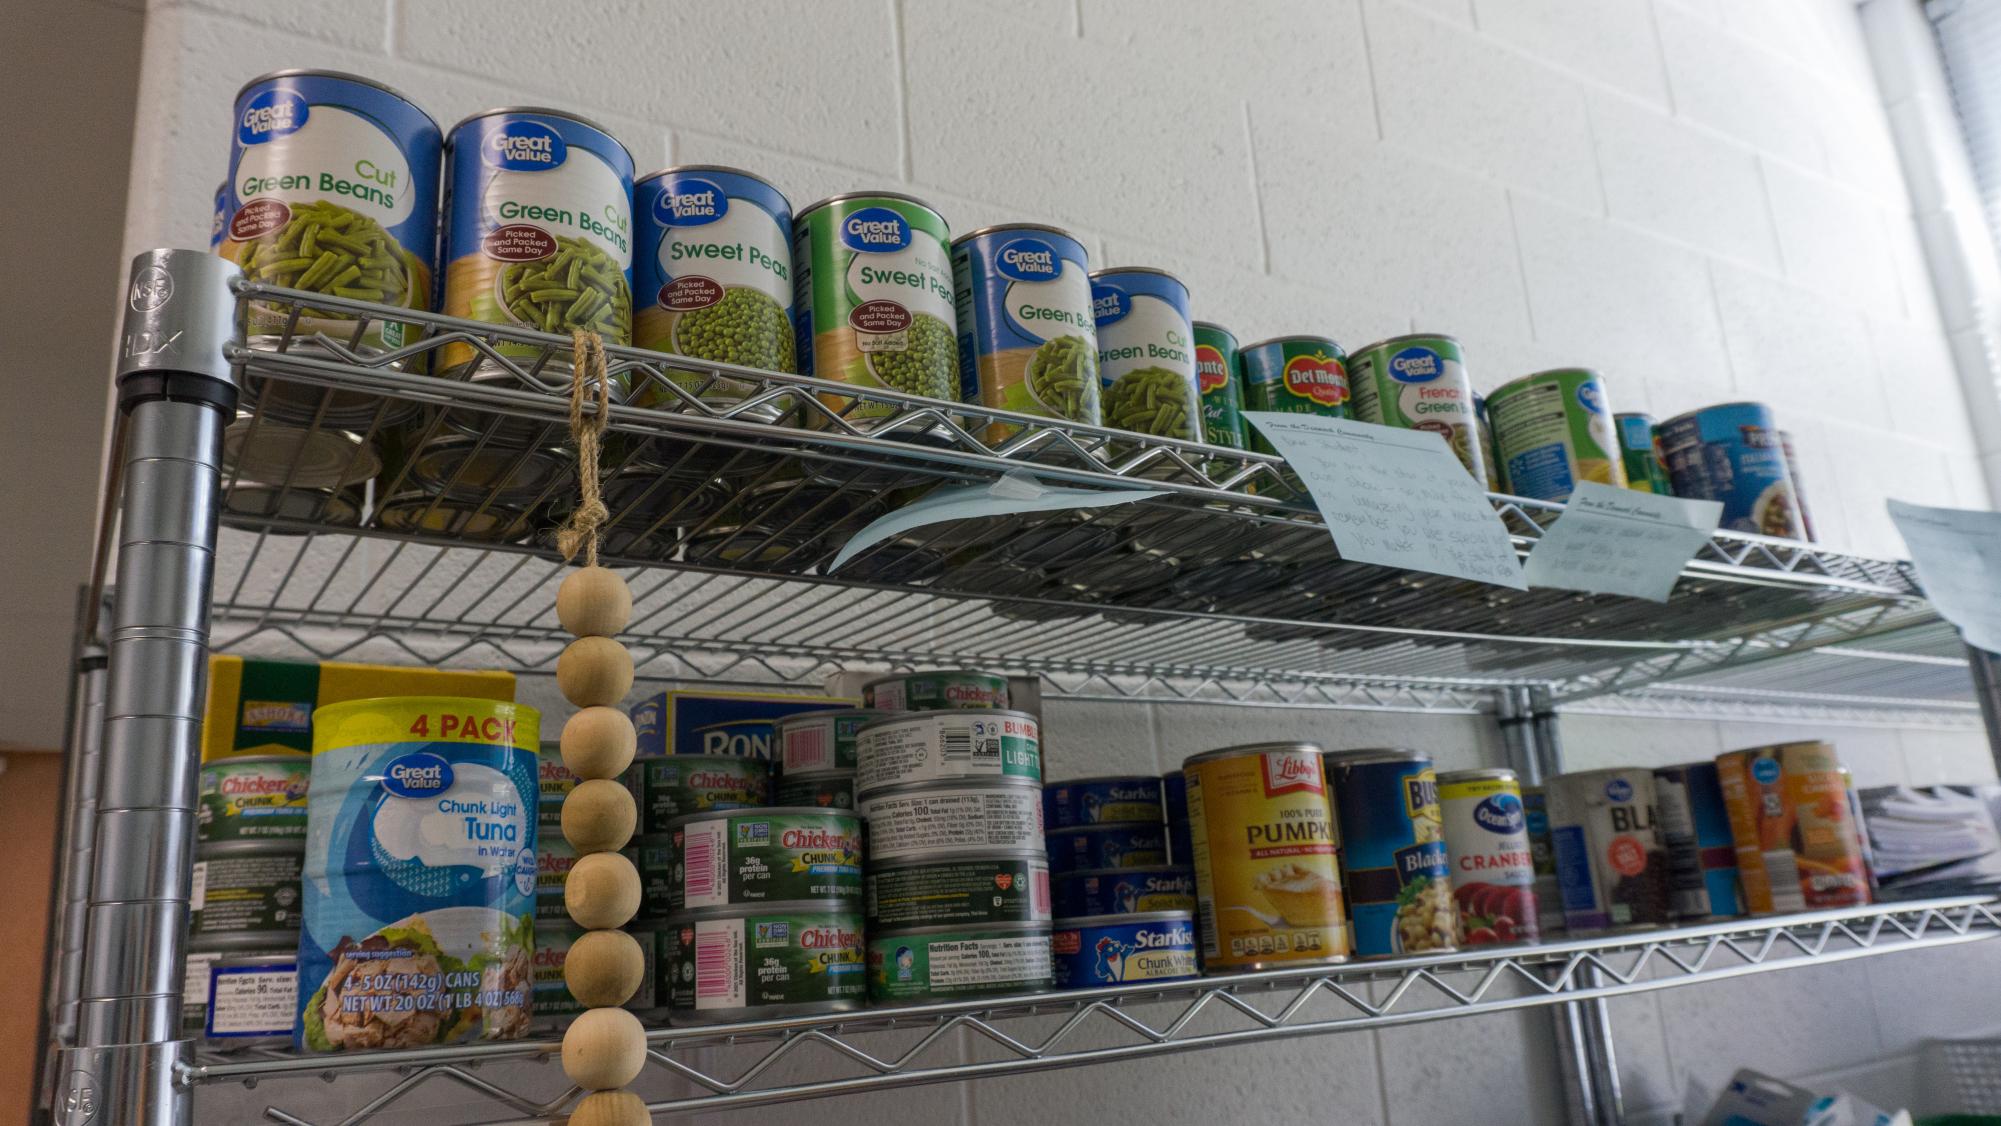 There is a variety of canned foods offered to students, and many different snacks as well.